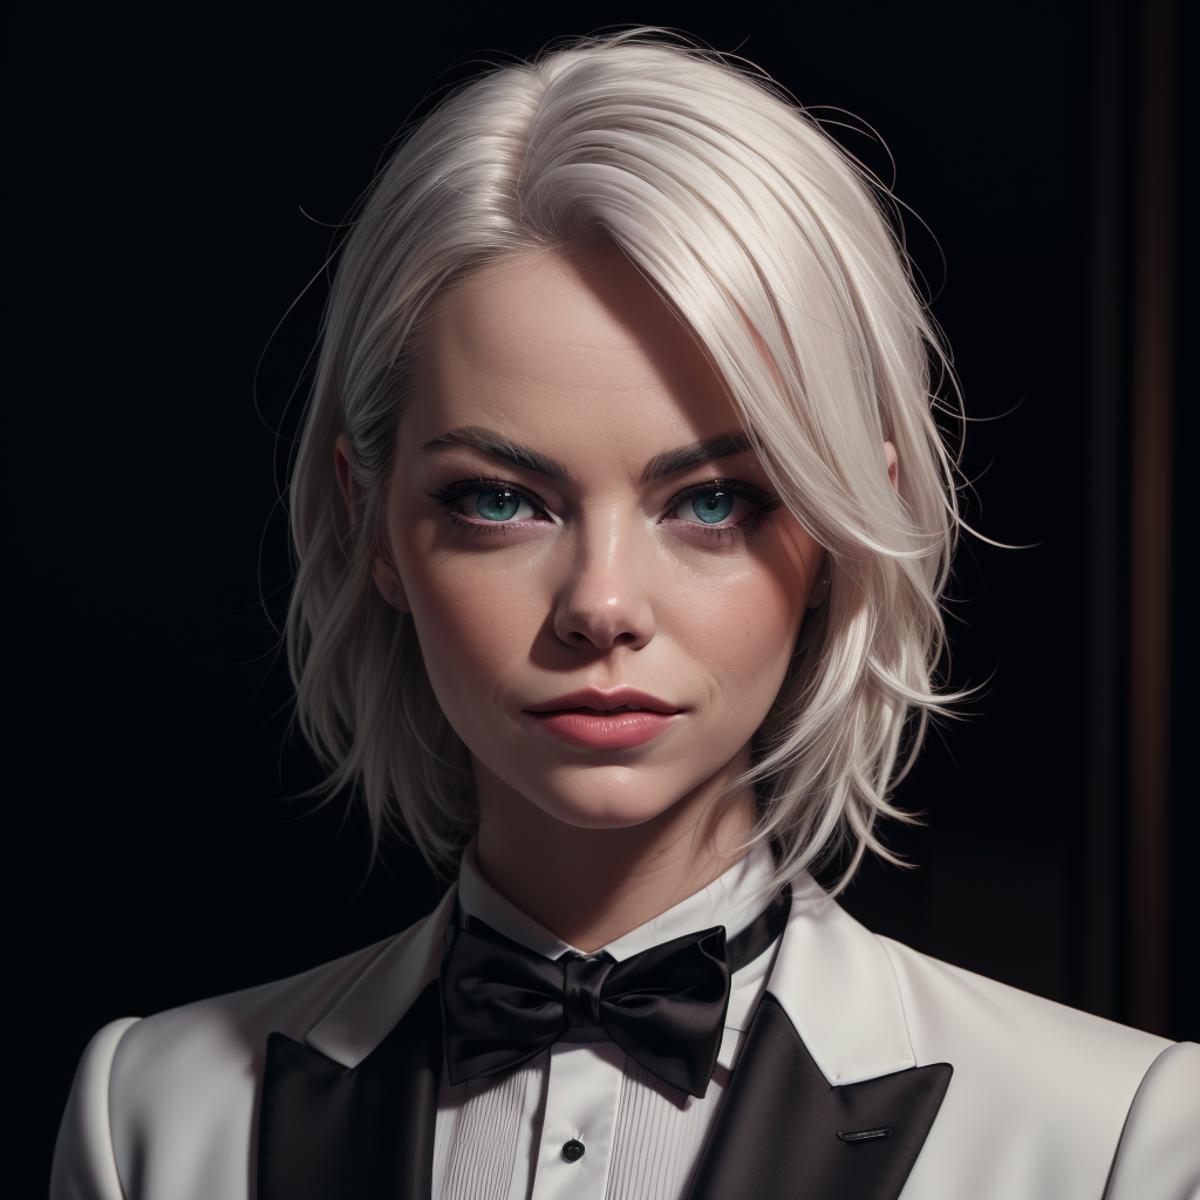 Emma Stone image by infamous__fish